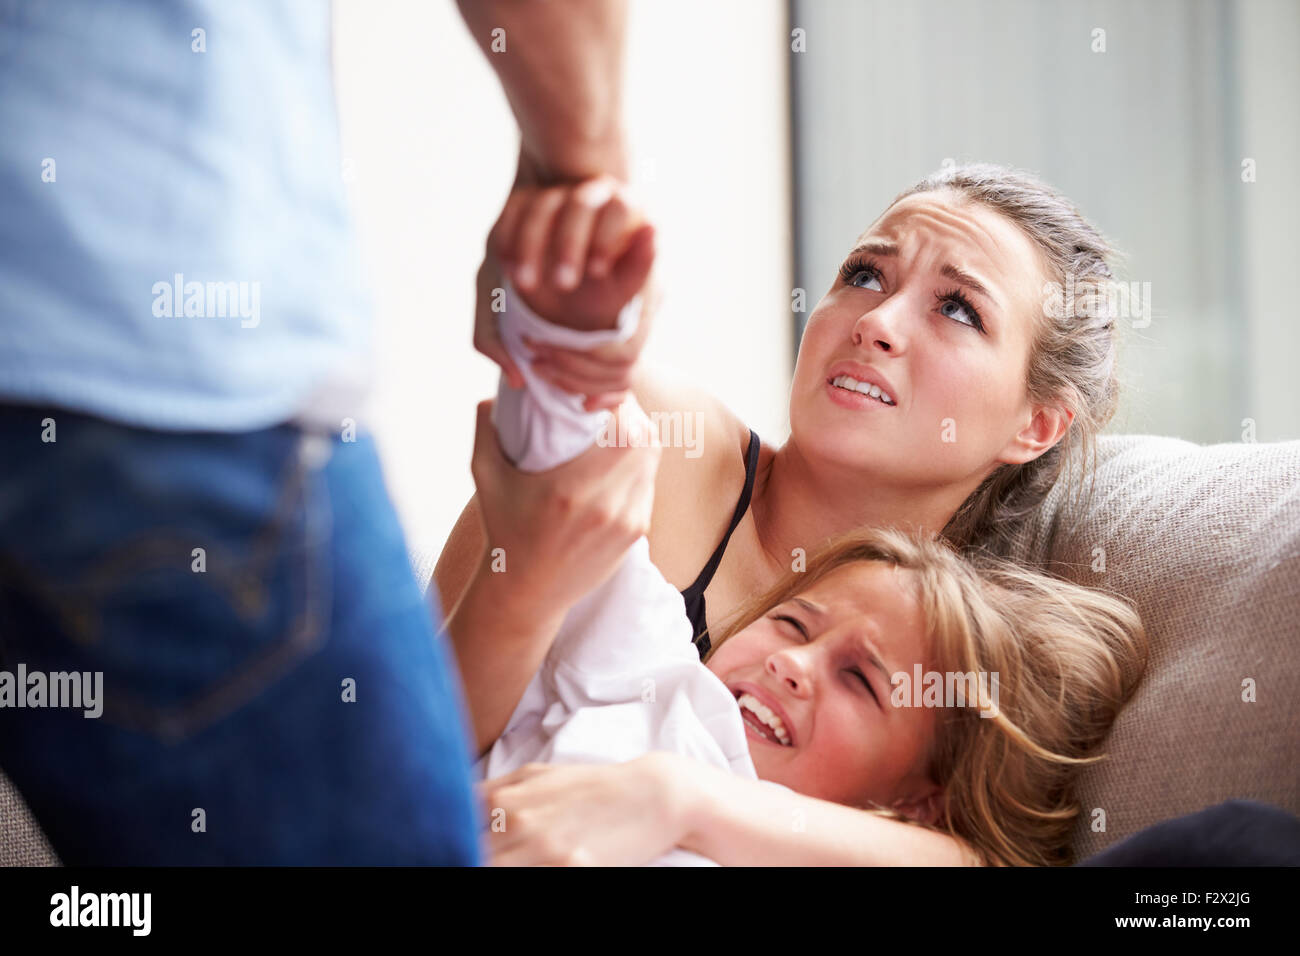 Man Being Physically Abusive Towards Family Stock Photo